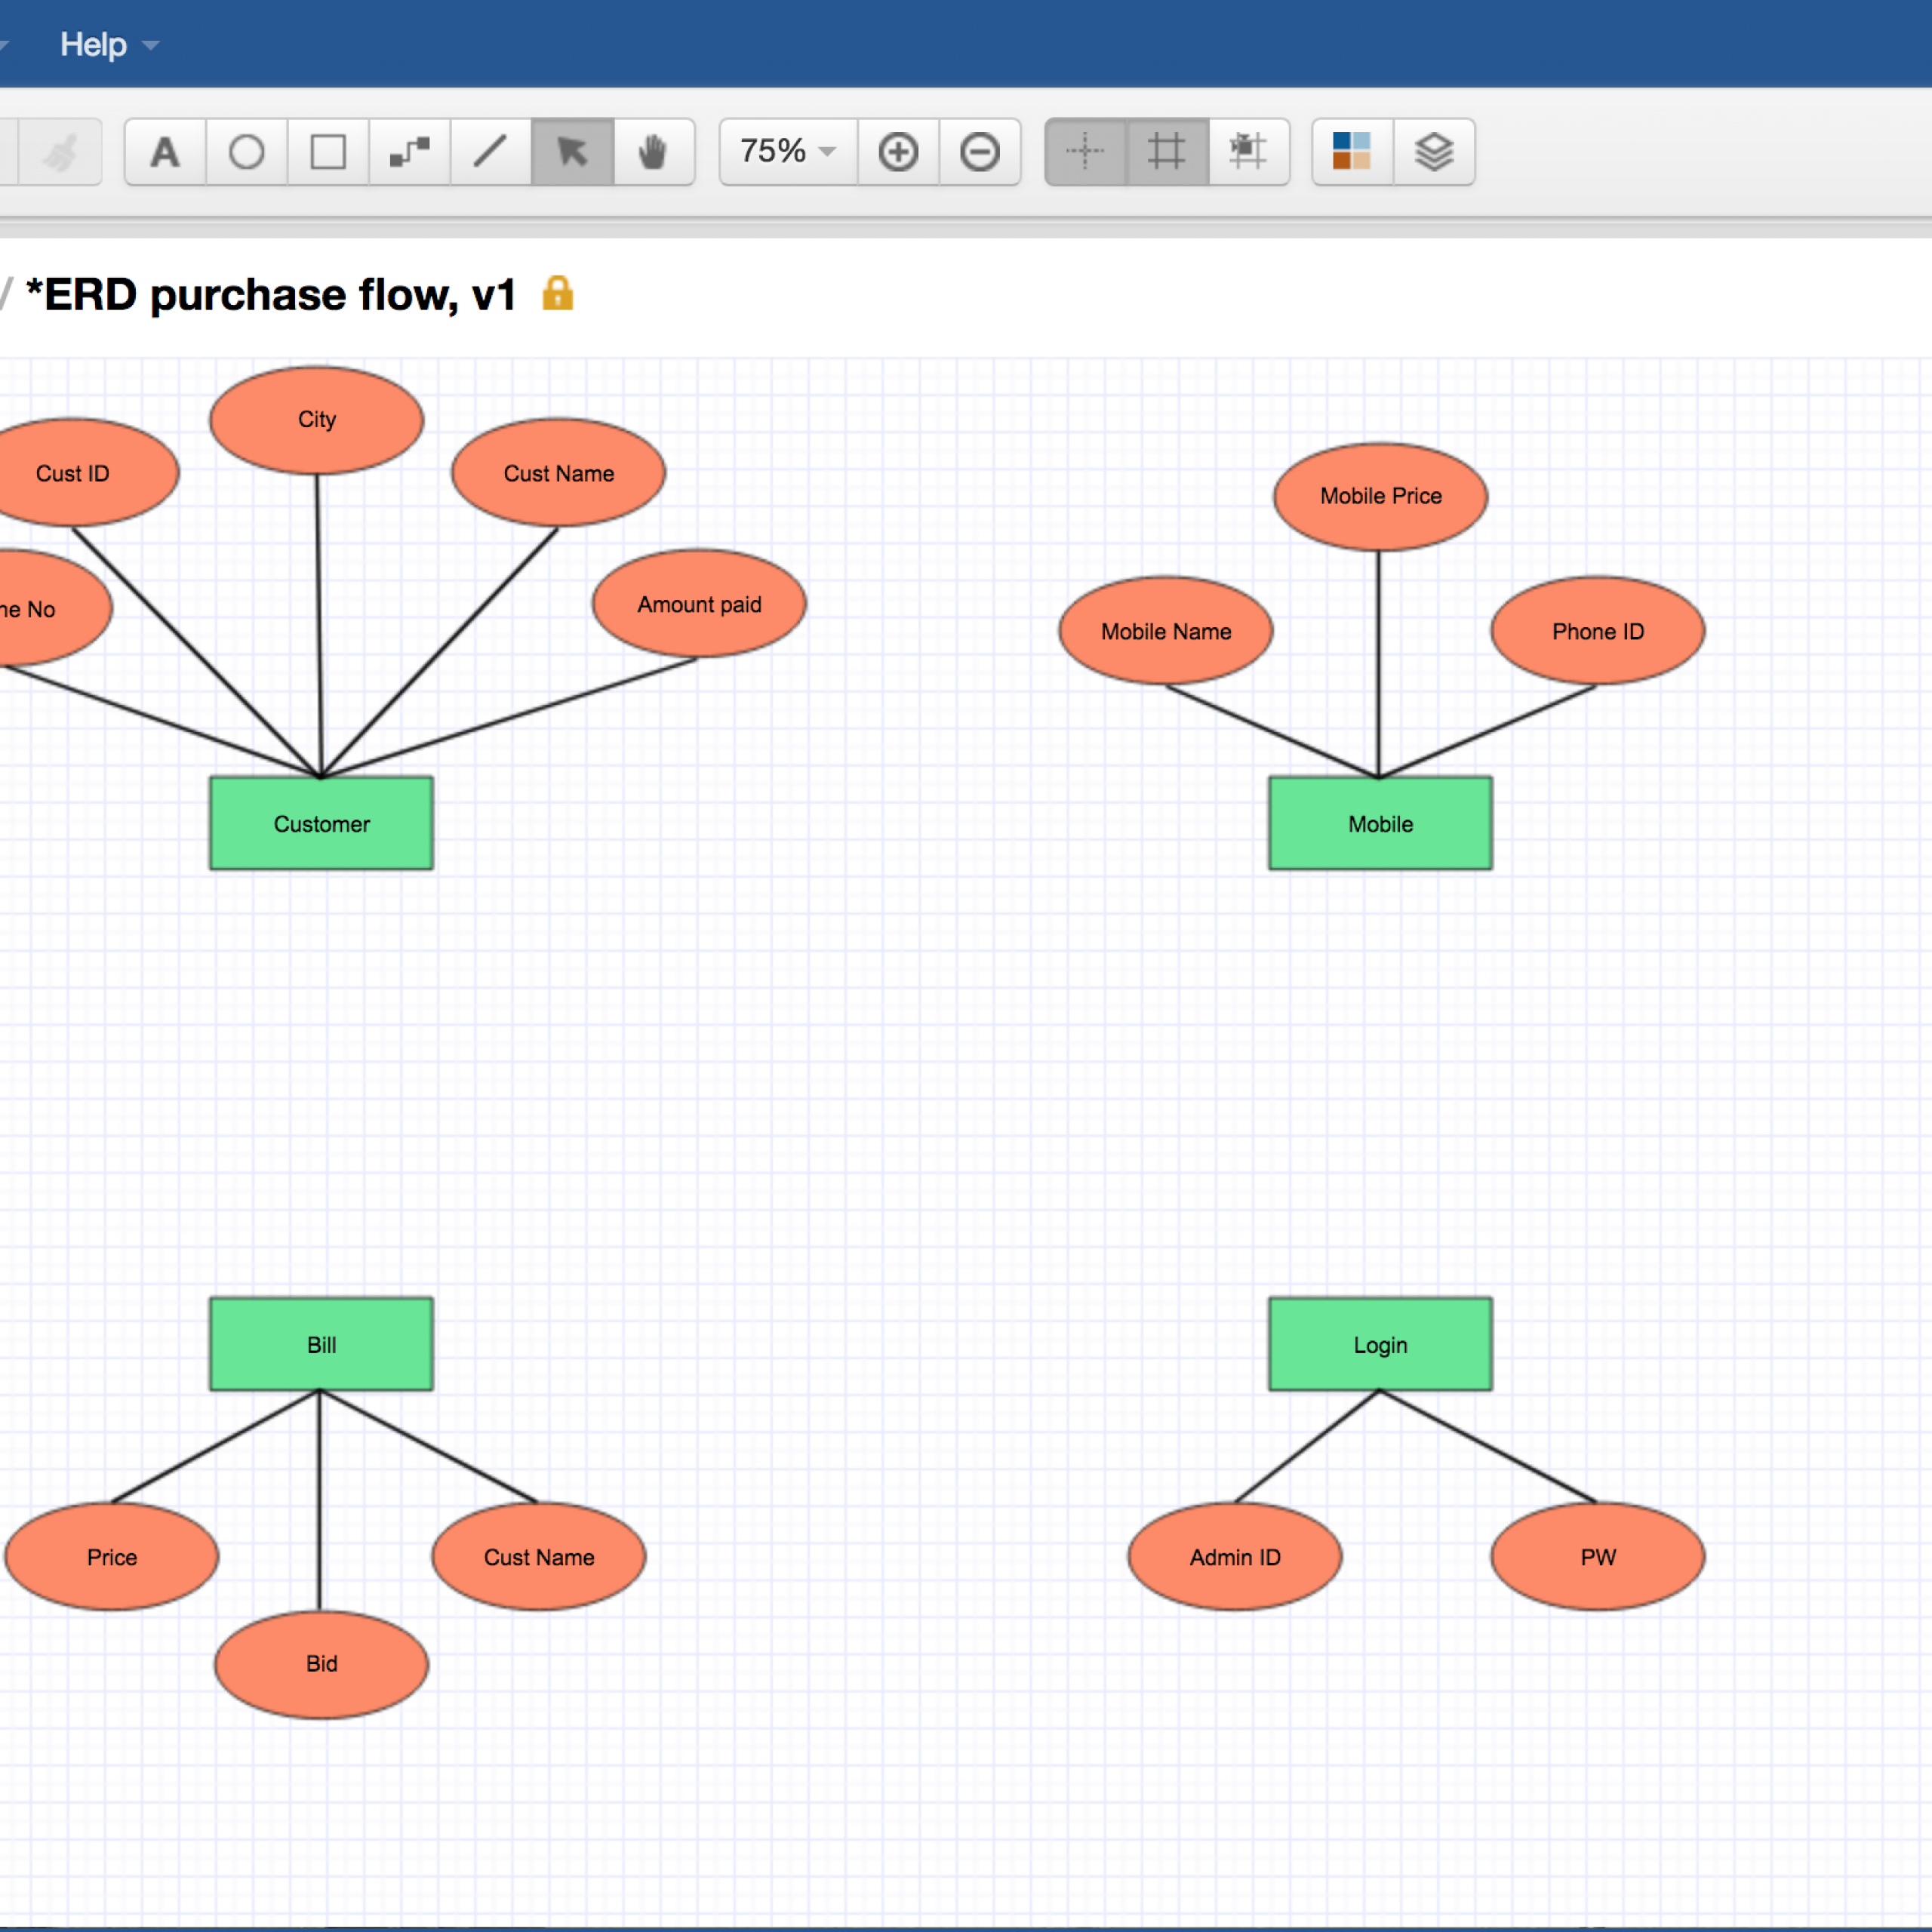 How To Draw An Entity-Relationship Diagram inside How To Make Erd Diagram In Word